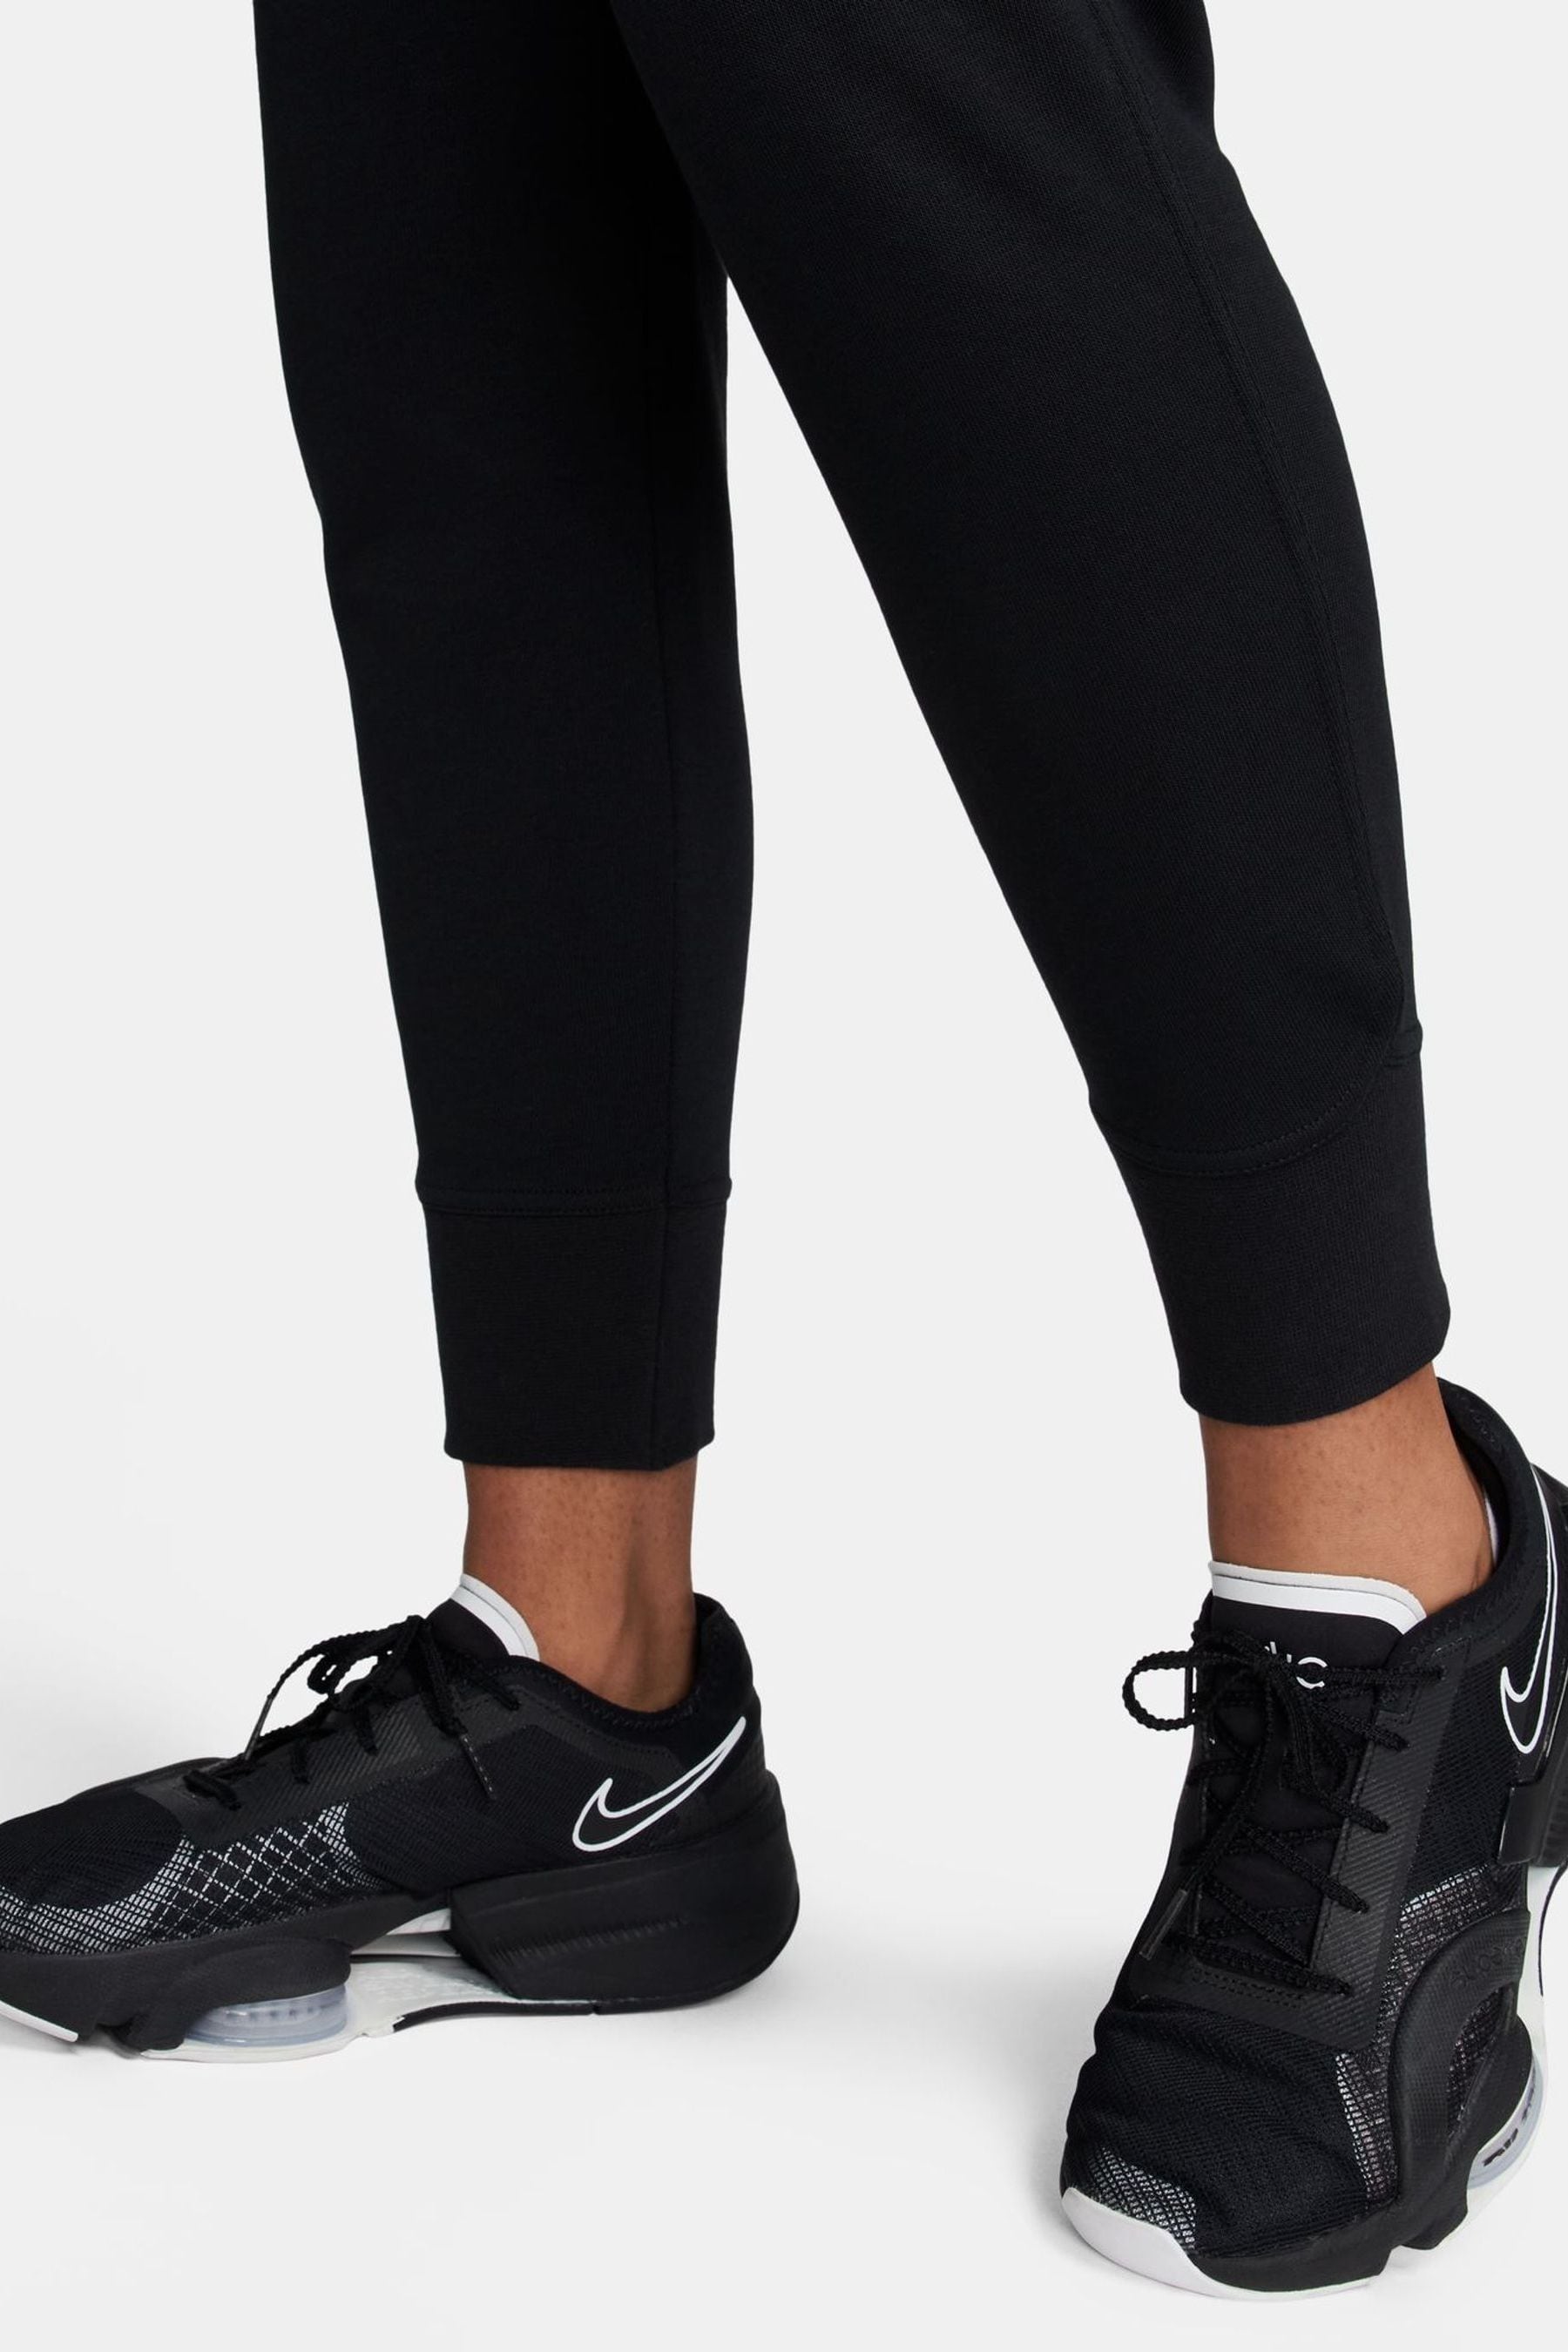 Buy Nike Black Dri-FIT Get Fit Training Joggers from the Next UK online ...